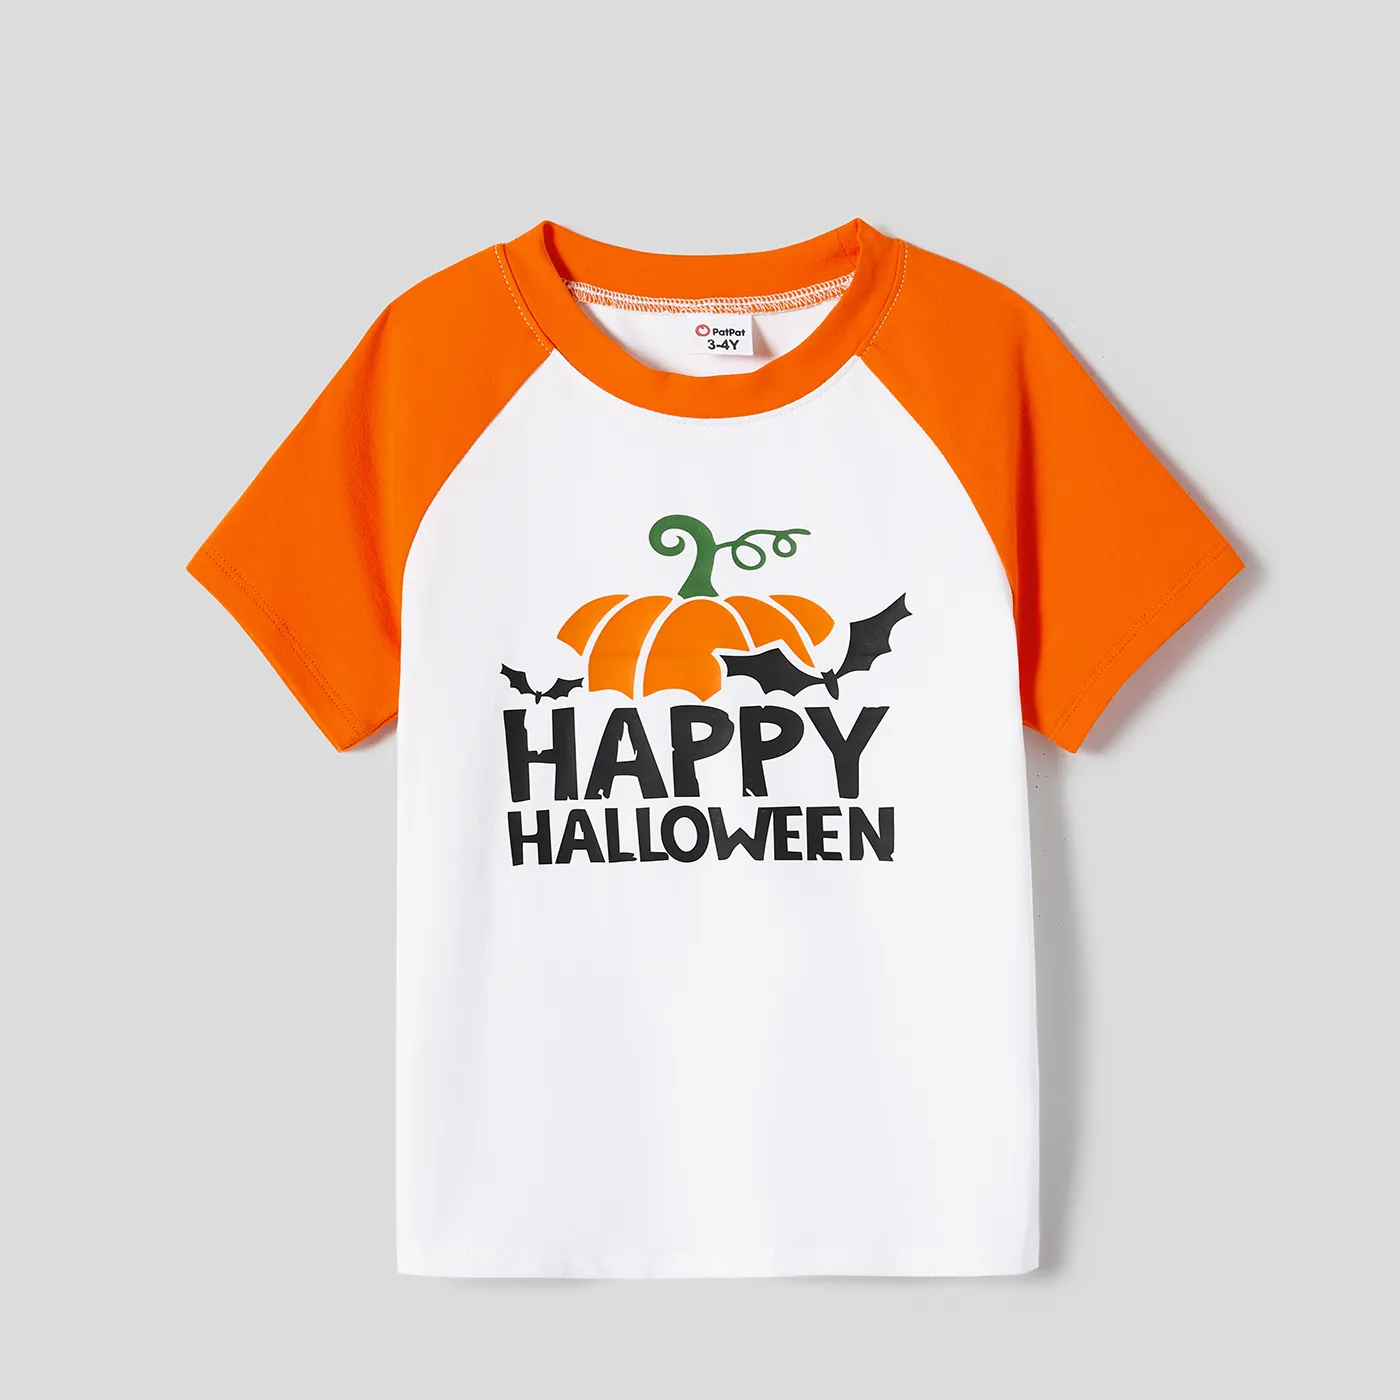 Halloween Family Matching Pumpkin Print Belted Dresses And Solid Letter Print Short Sleeve Tops Sets